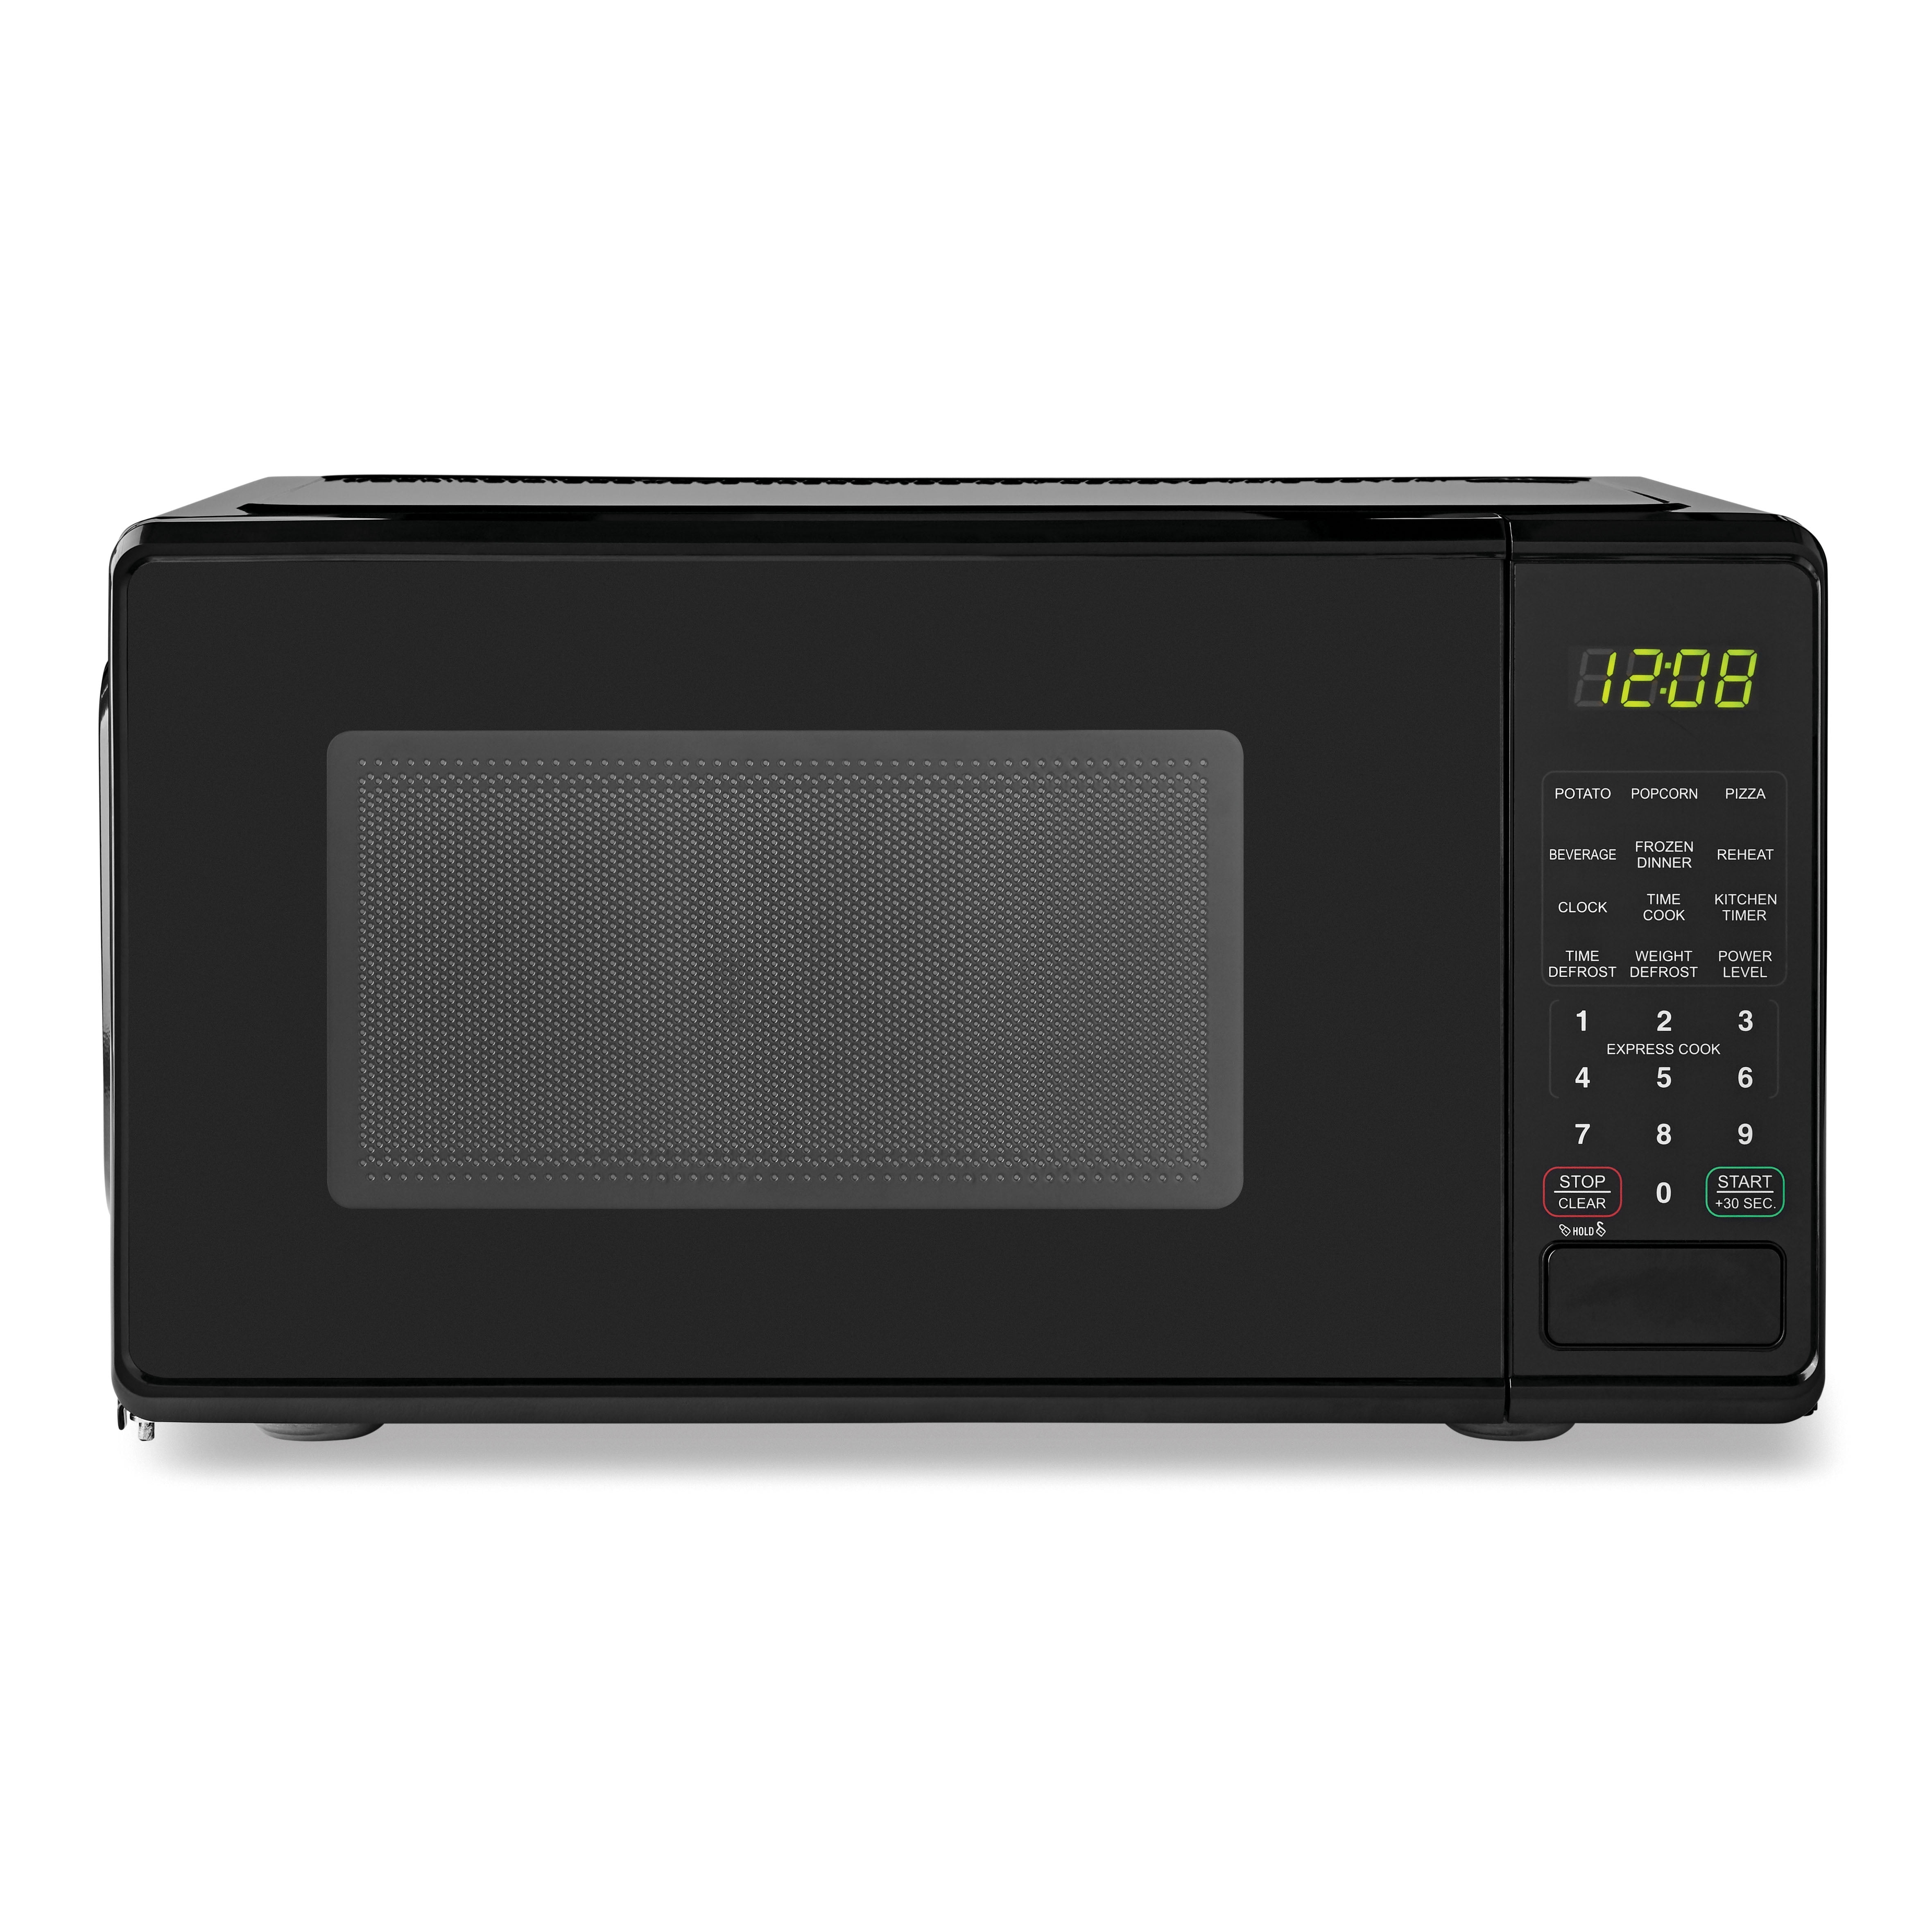 700W Microwave Oven Ft Details about   Mainstays 0.7 Cu